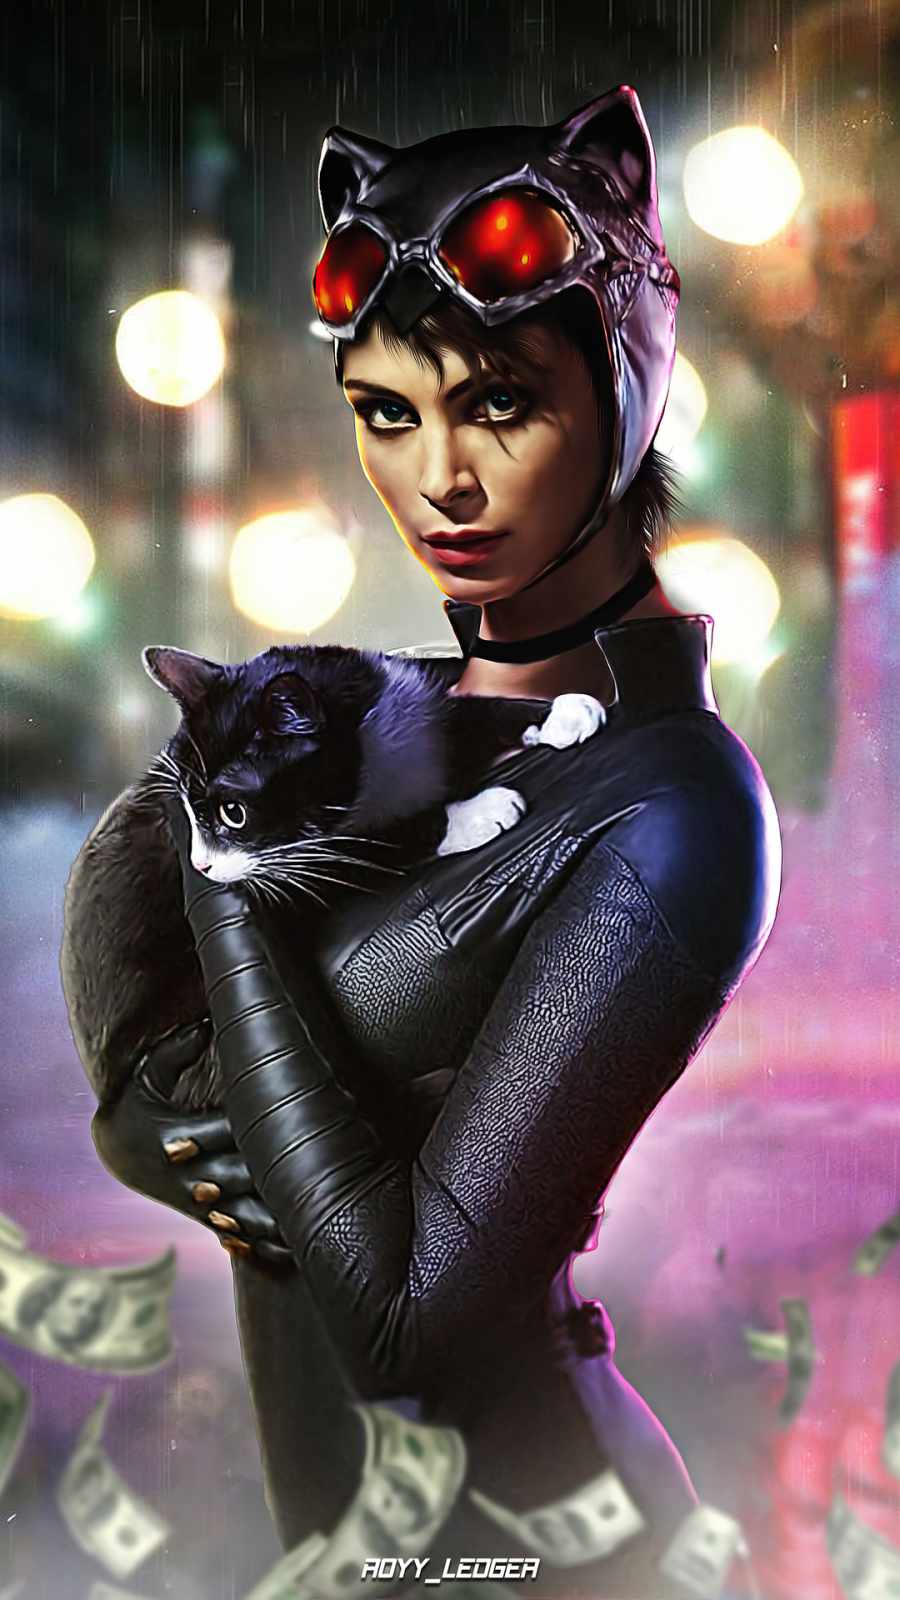 Morena Baccarin as Catwoman